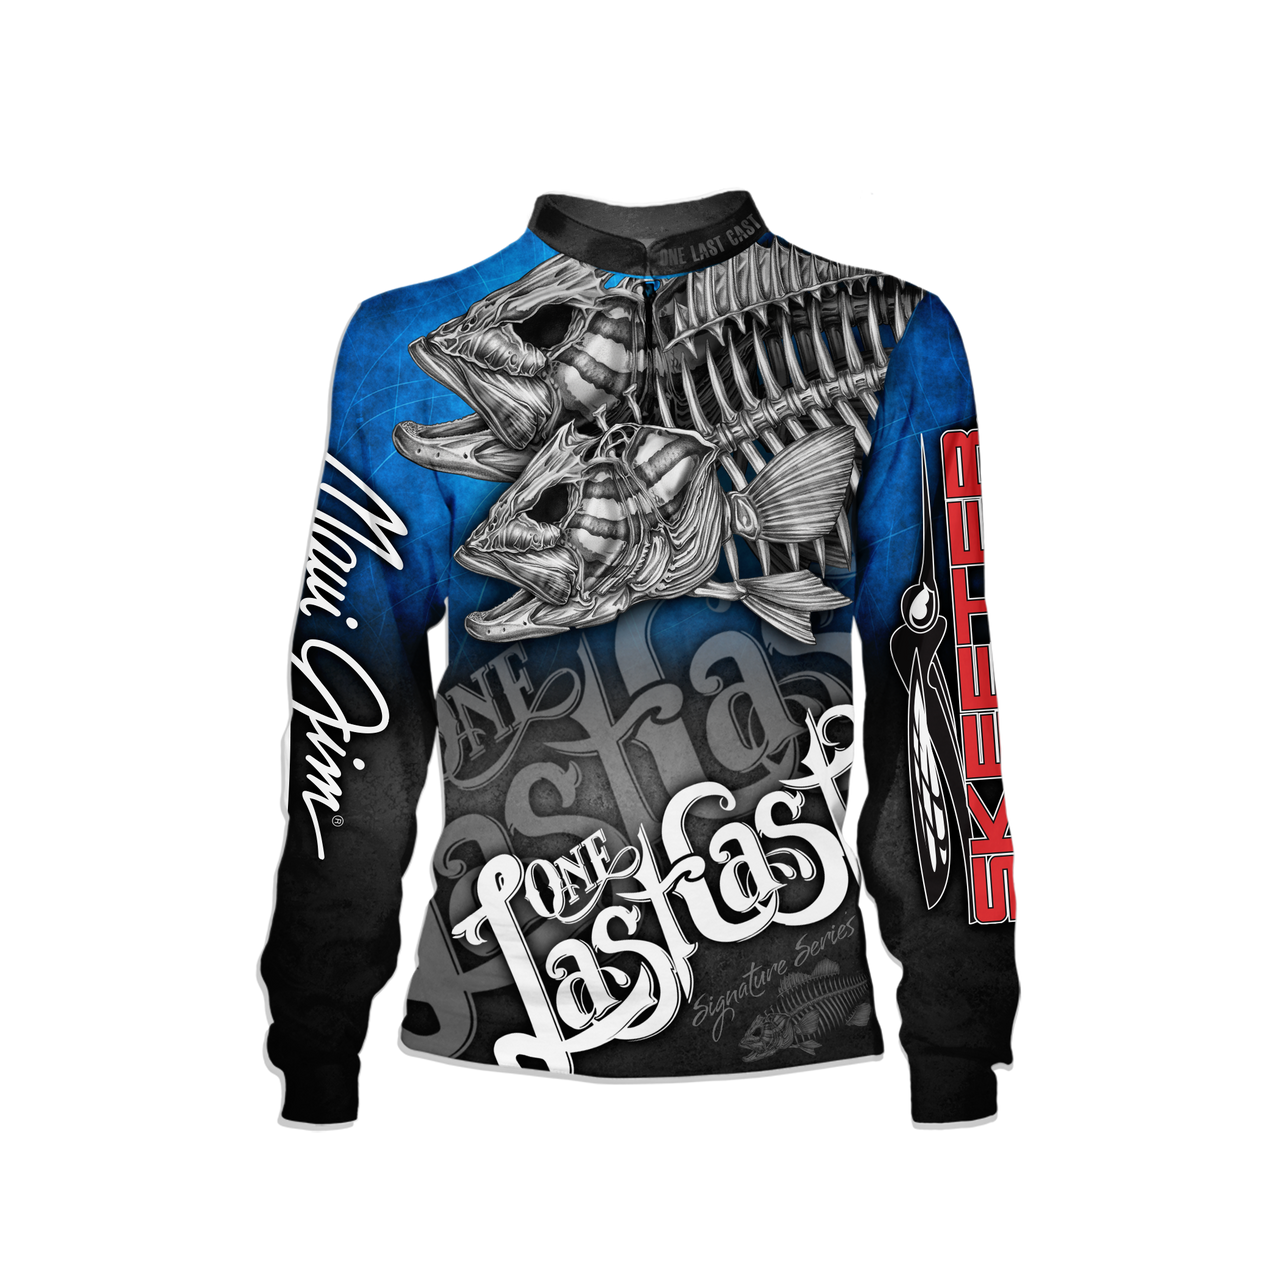 https://cdn11.bigcommerce.com/s-eemvl8dub3/images/stencil/1280x1280/products/157/947/Insidious_Bass_Jersey_Front_logos__55612.1571880404.png?c=2?imbypass=on